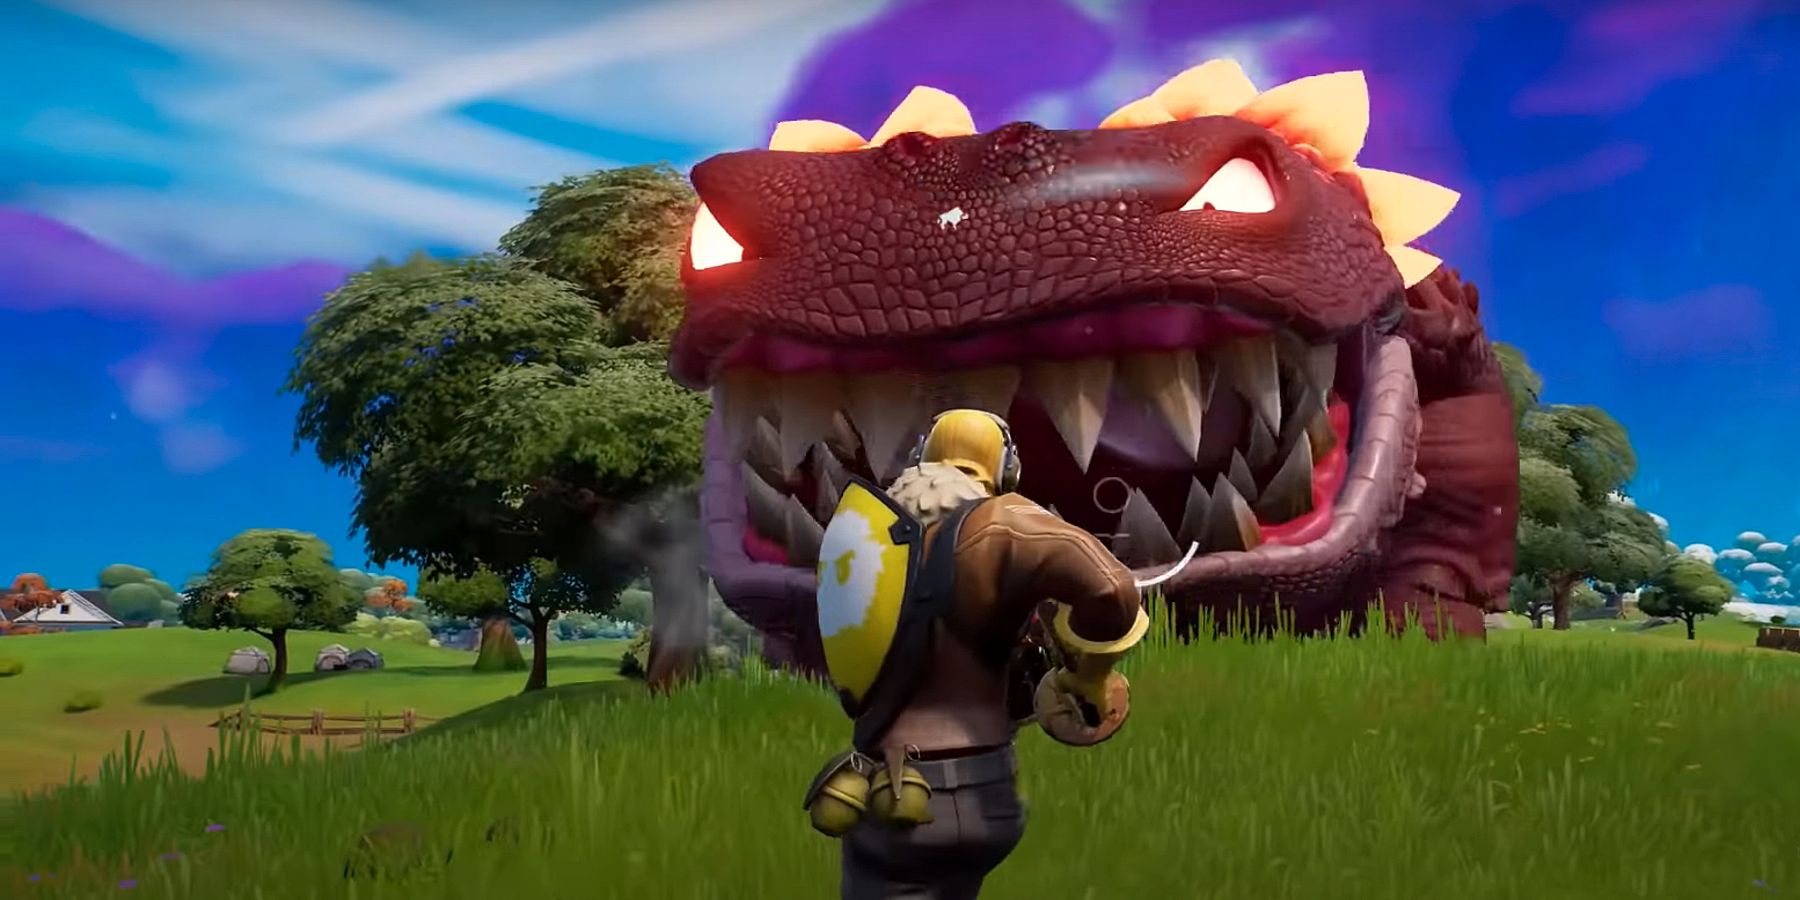 Fortnite: How to Feed Klomberries to a Klombo